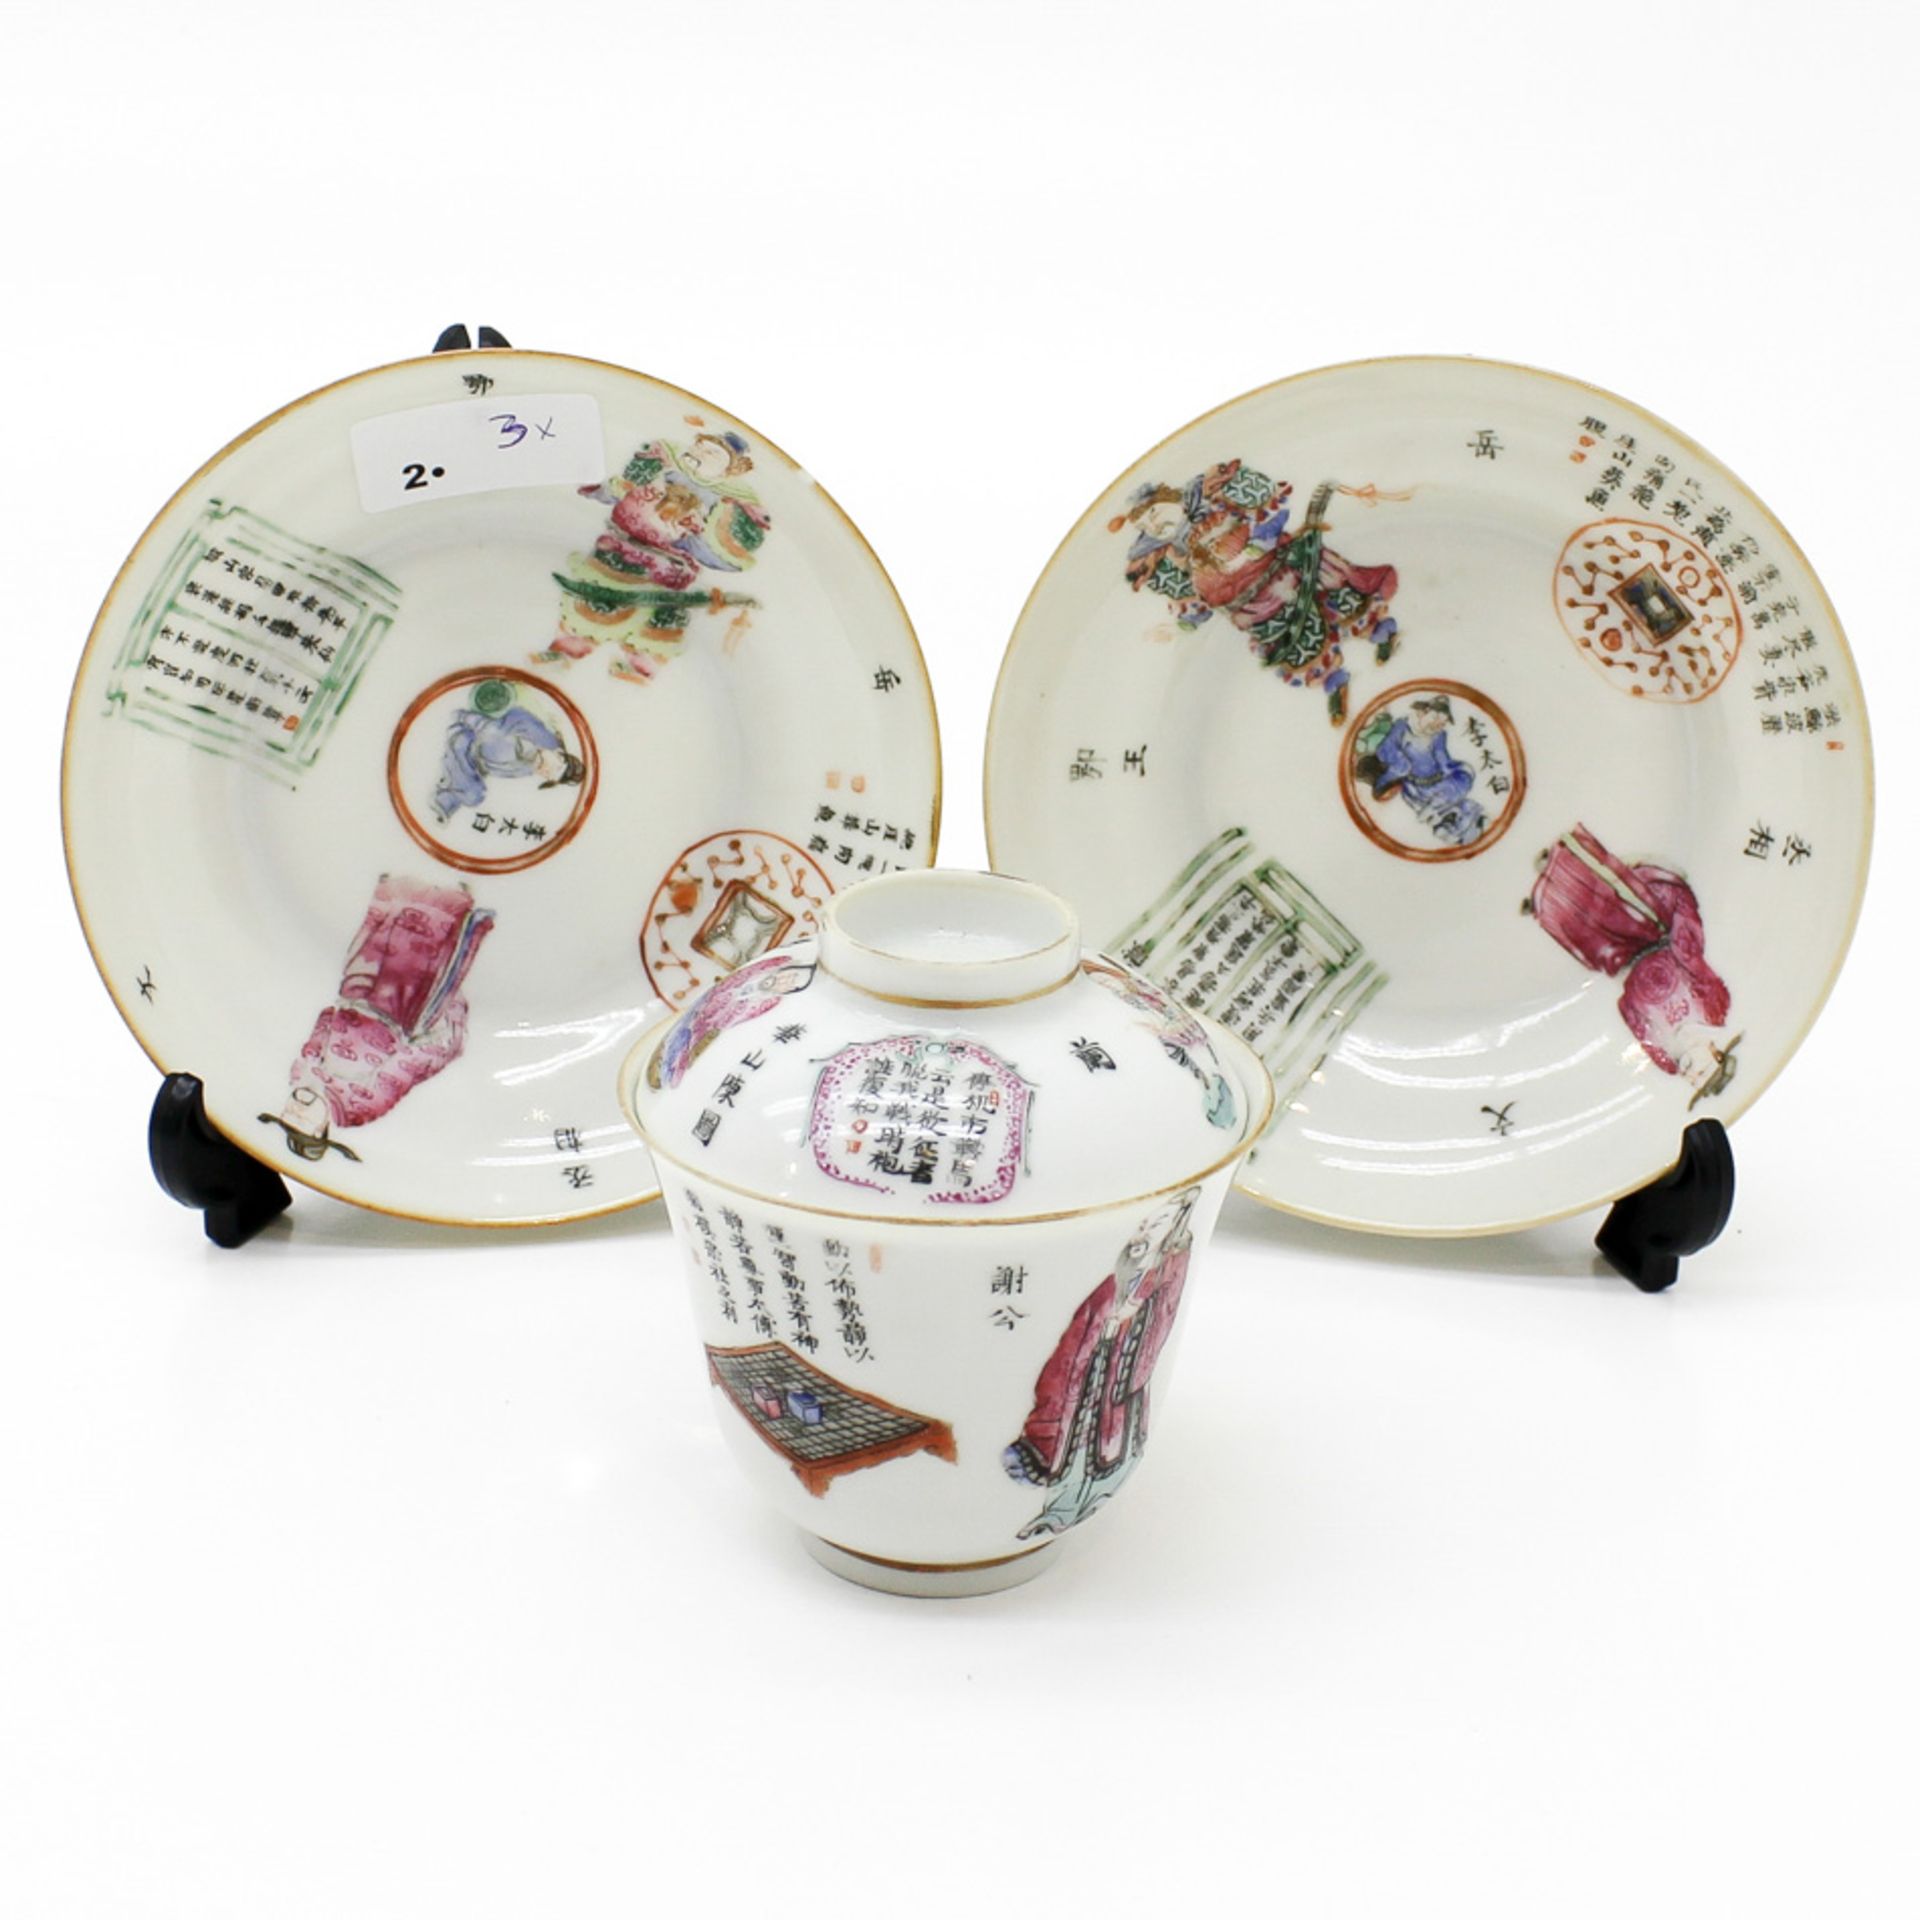 19th Century China Porcelain Covered Cup and Saucers Decor with figures and Chinese text